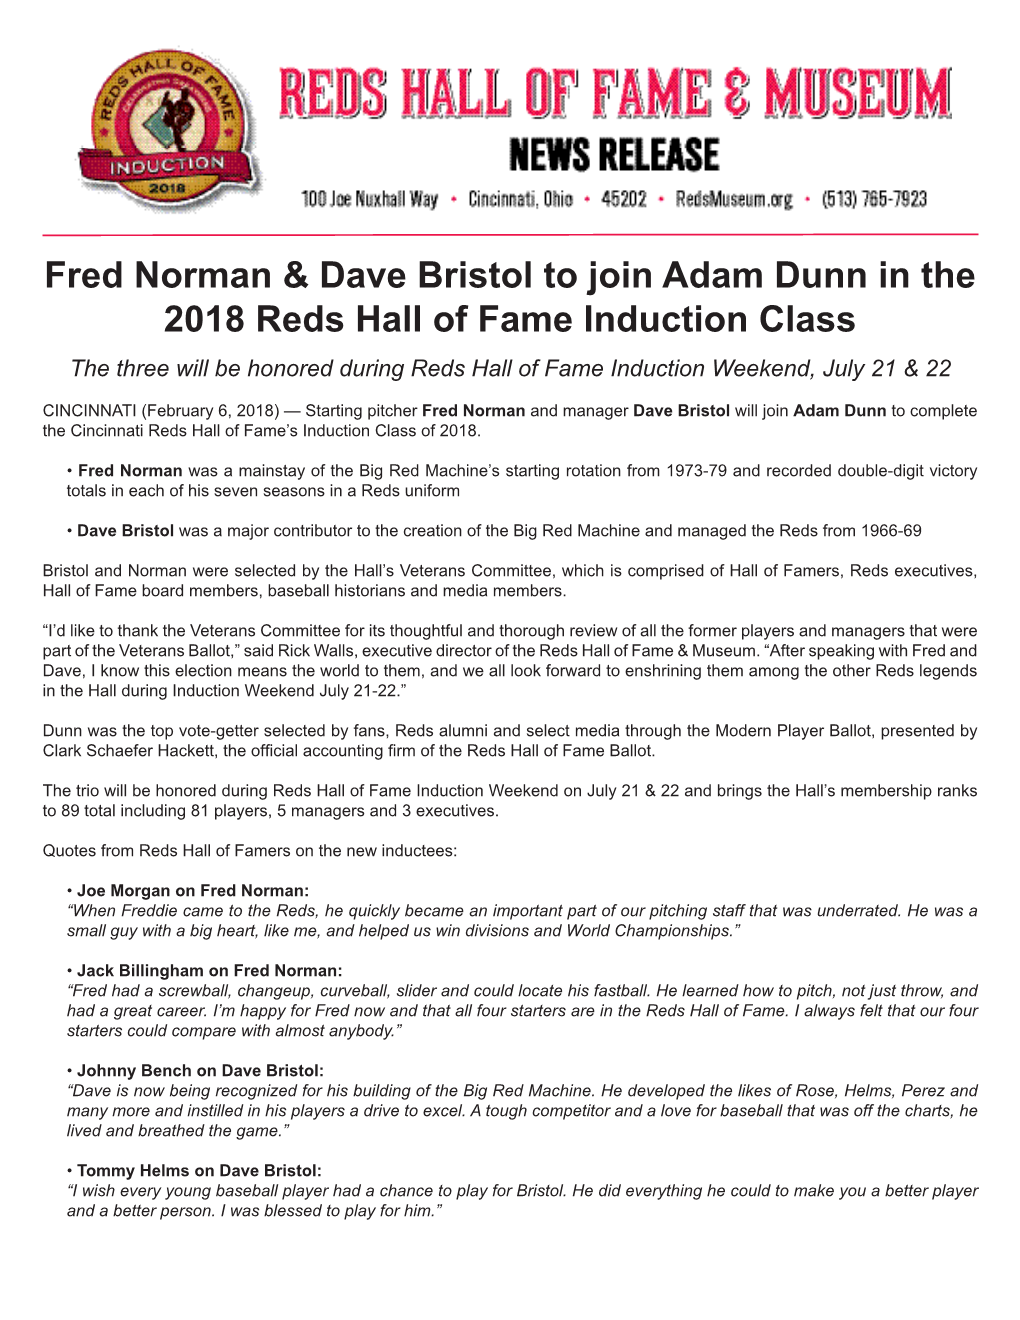 Fred Norman & Dave Bristol to Join Adam Dunn in the 2018 Reds Hall